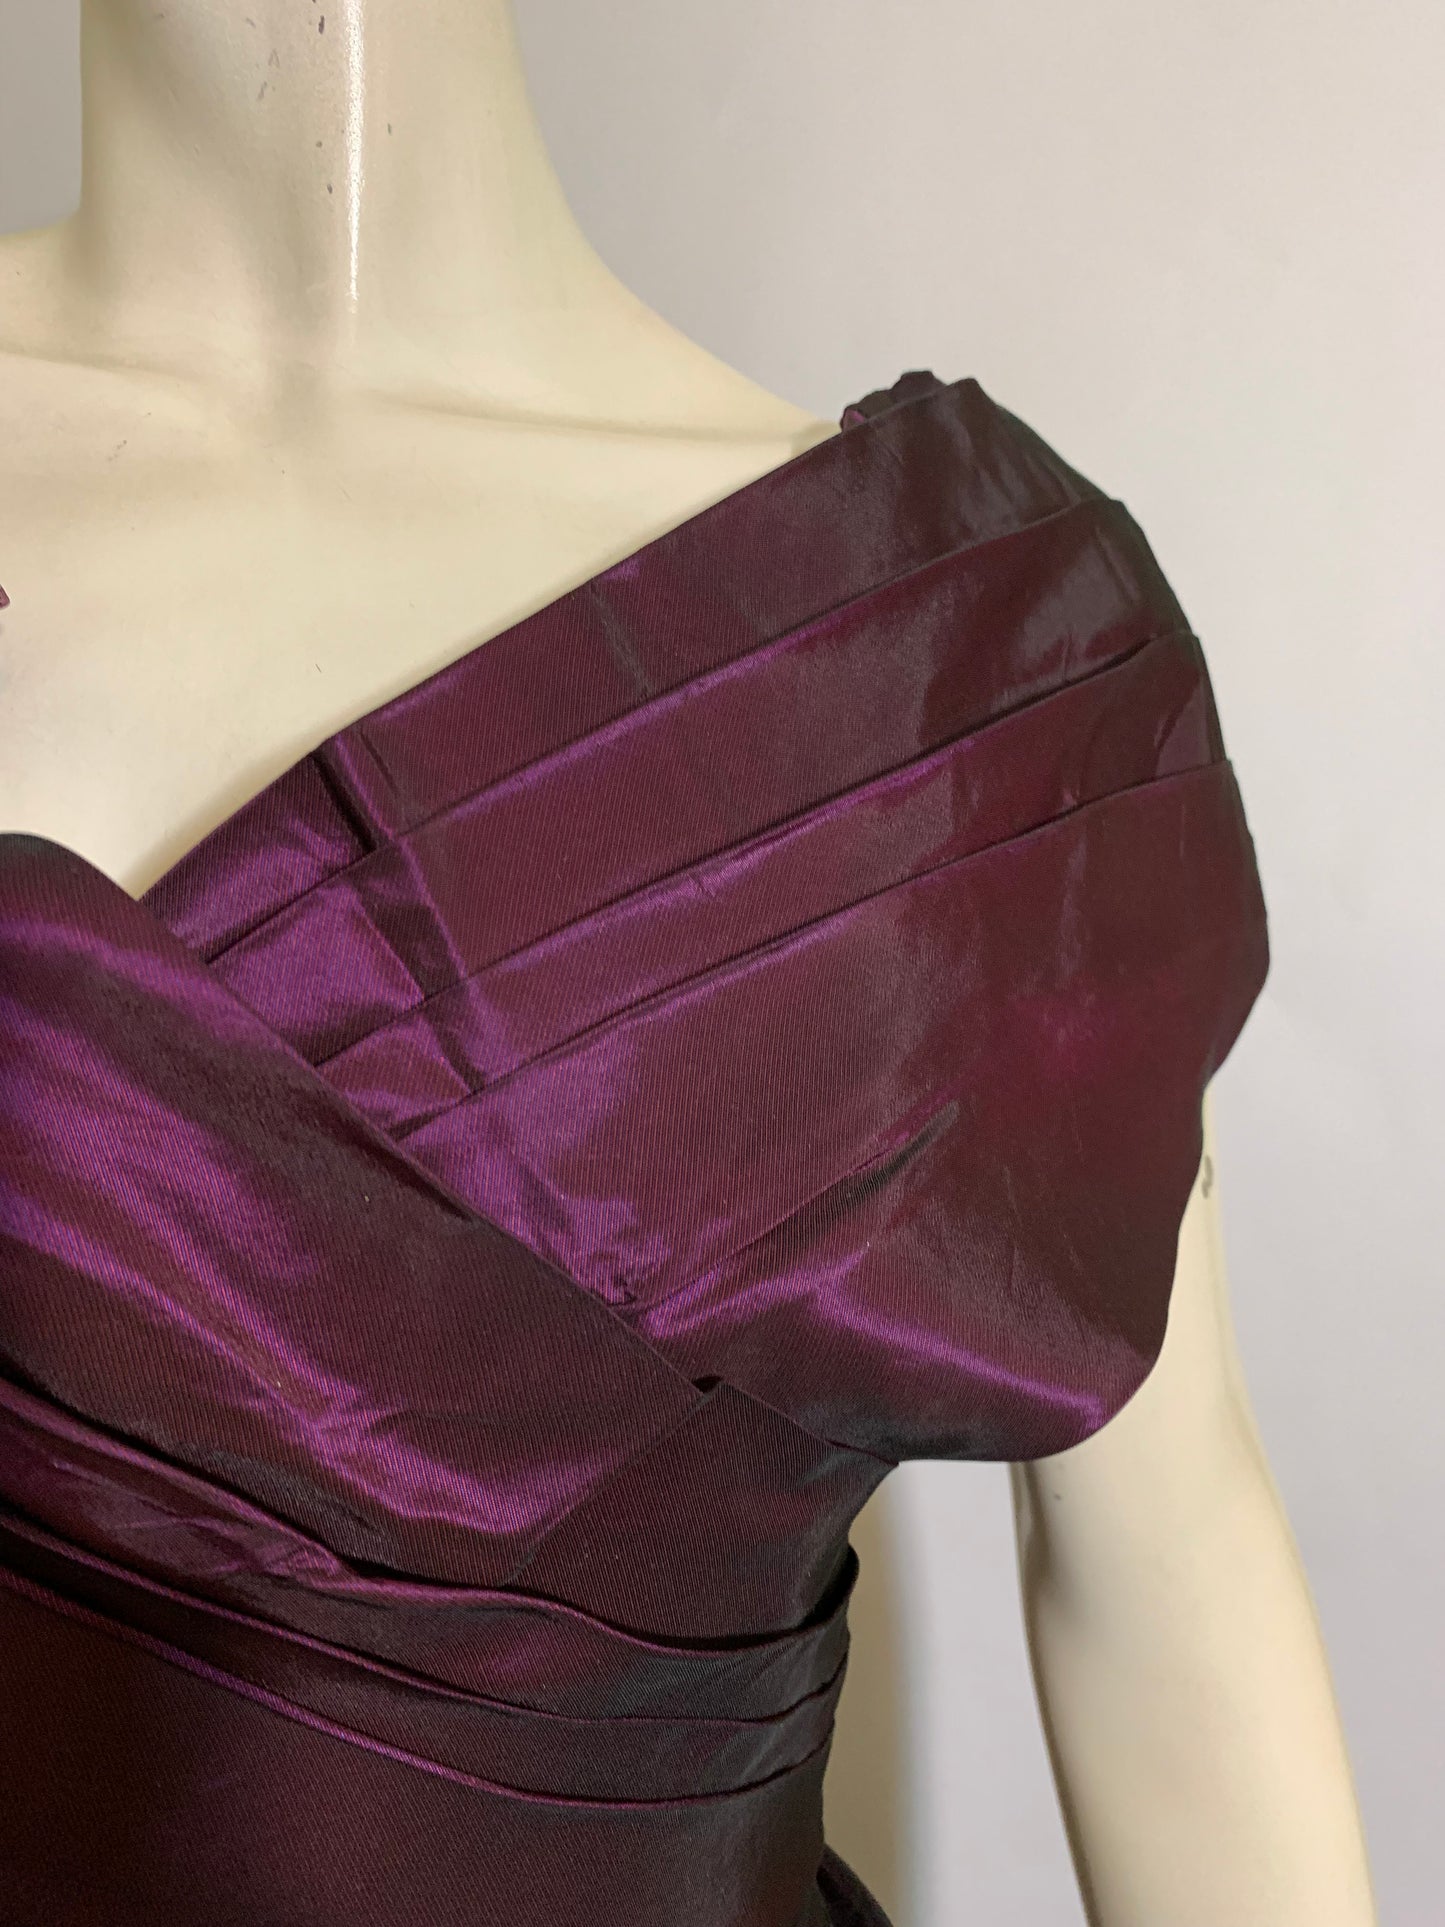 Brilliant Purple Changeable Taffeta Party Dress with Flower Accents circa 1980s